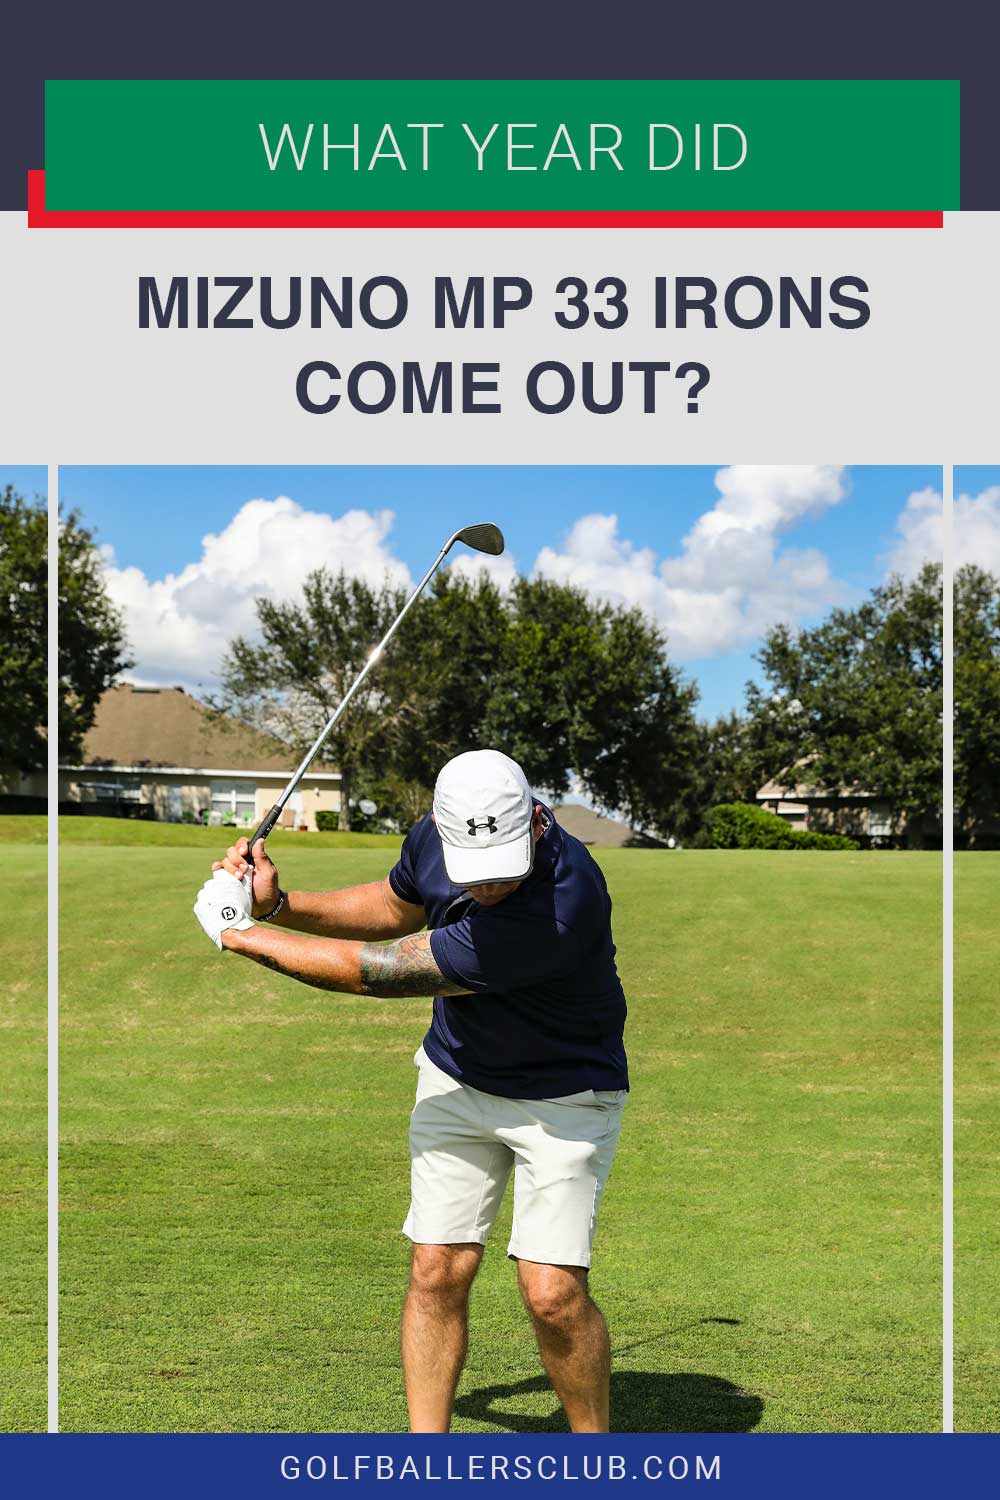 Man with white cap hitting a golf ball - What Year Did Mizuno MP 33 Irons Come Out?